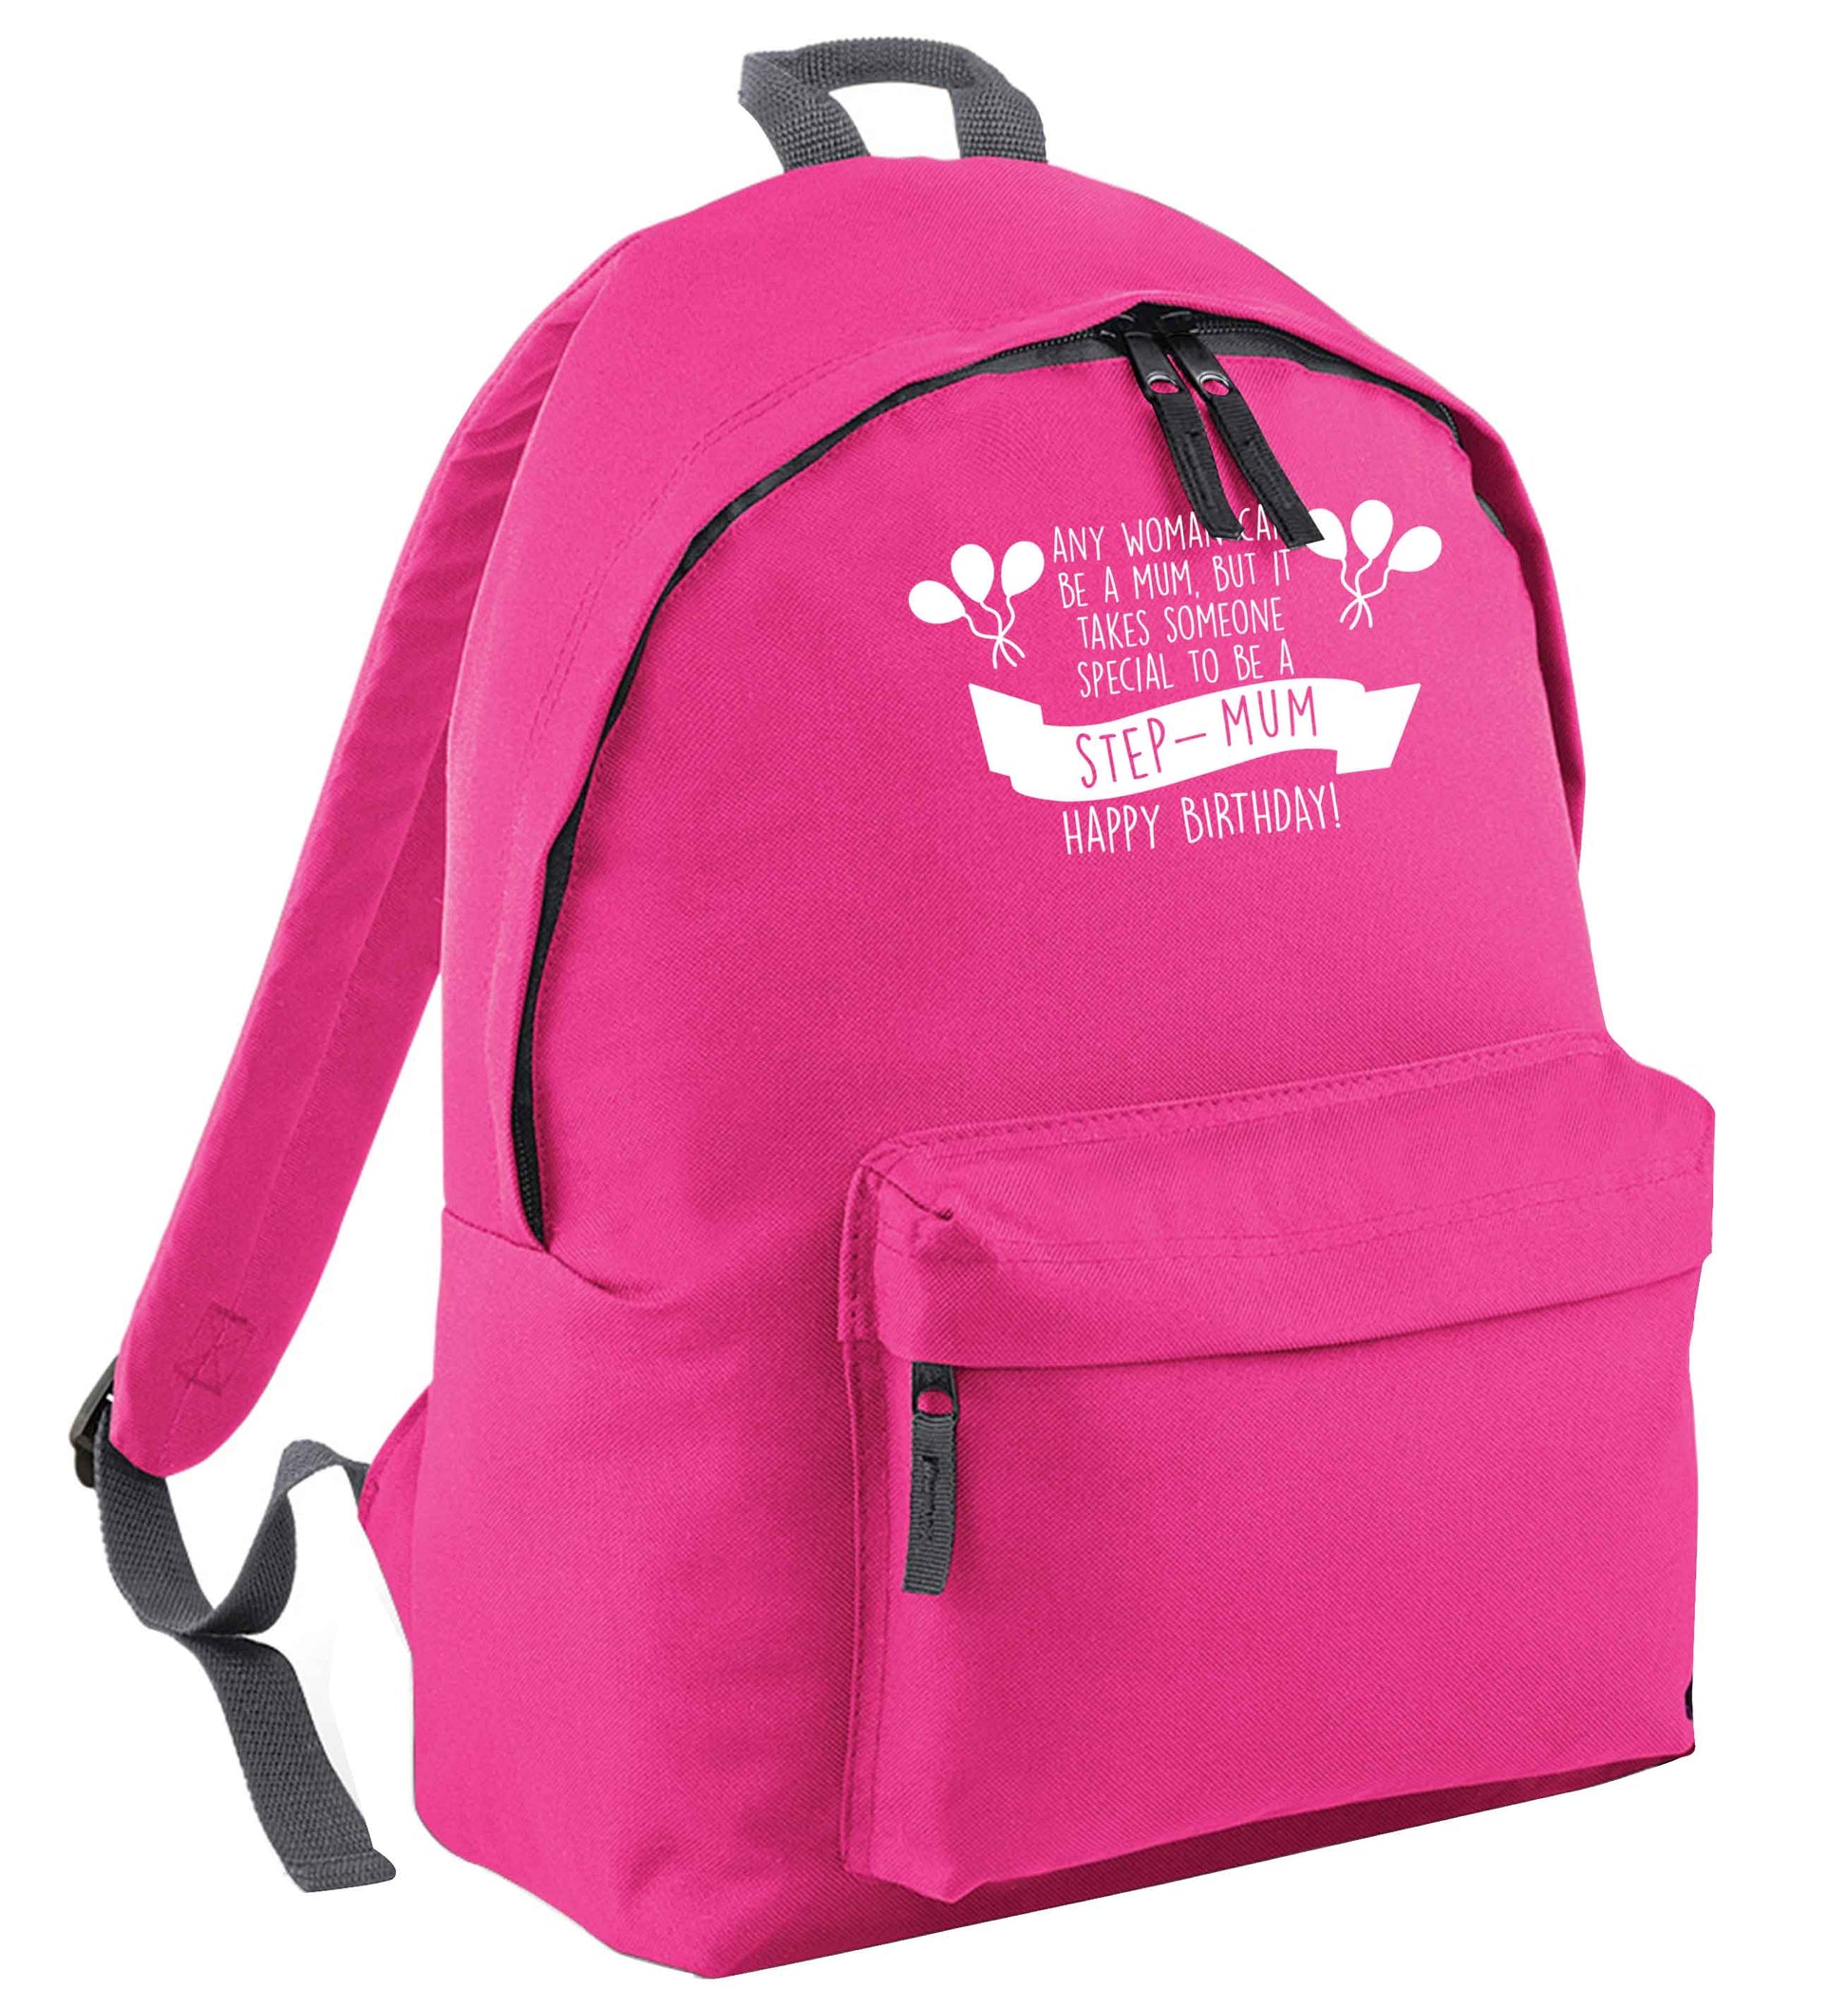 Takes someone special to be a step-mum, happy birthday! pink childrens backpack